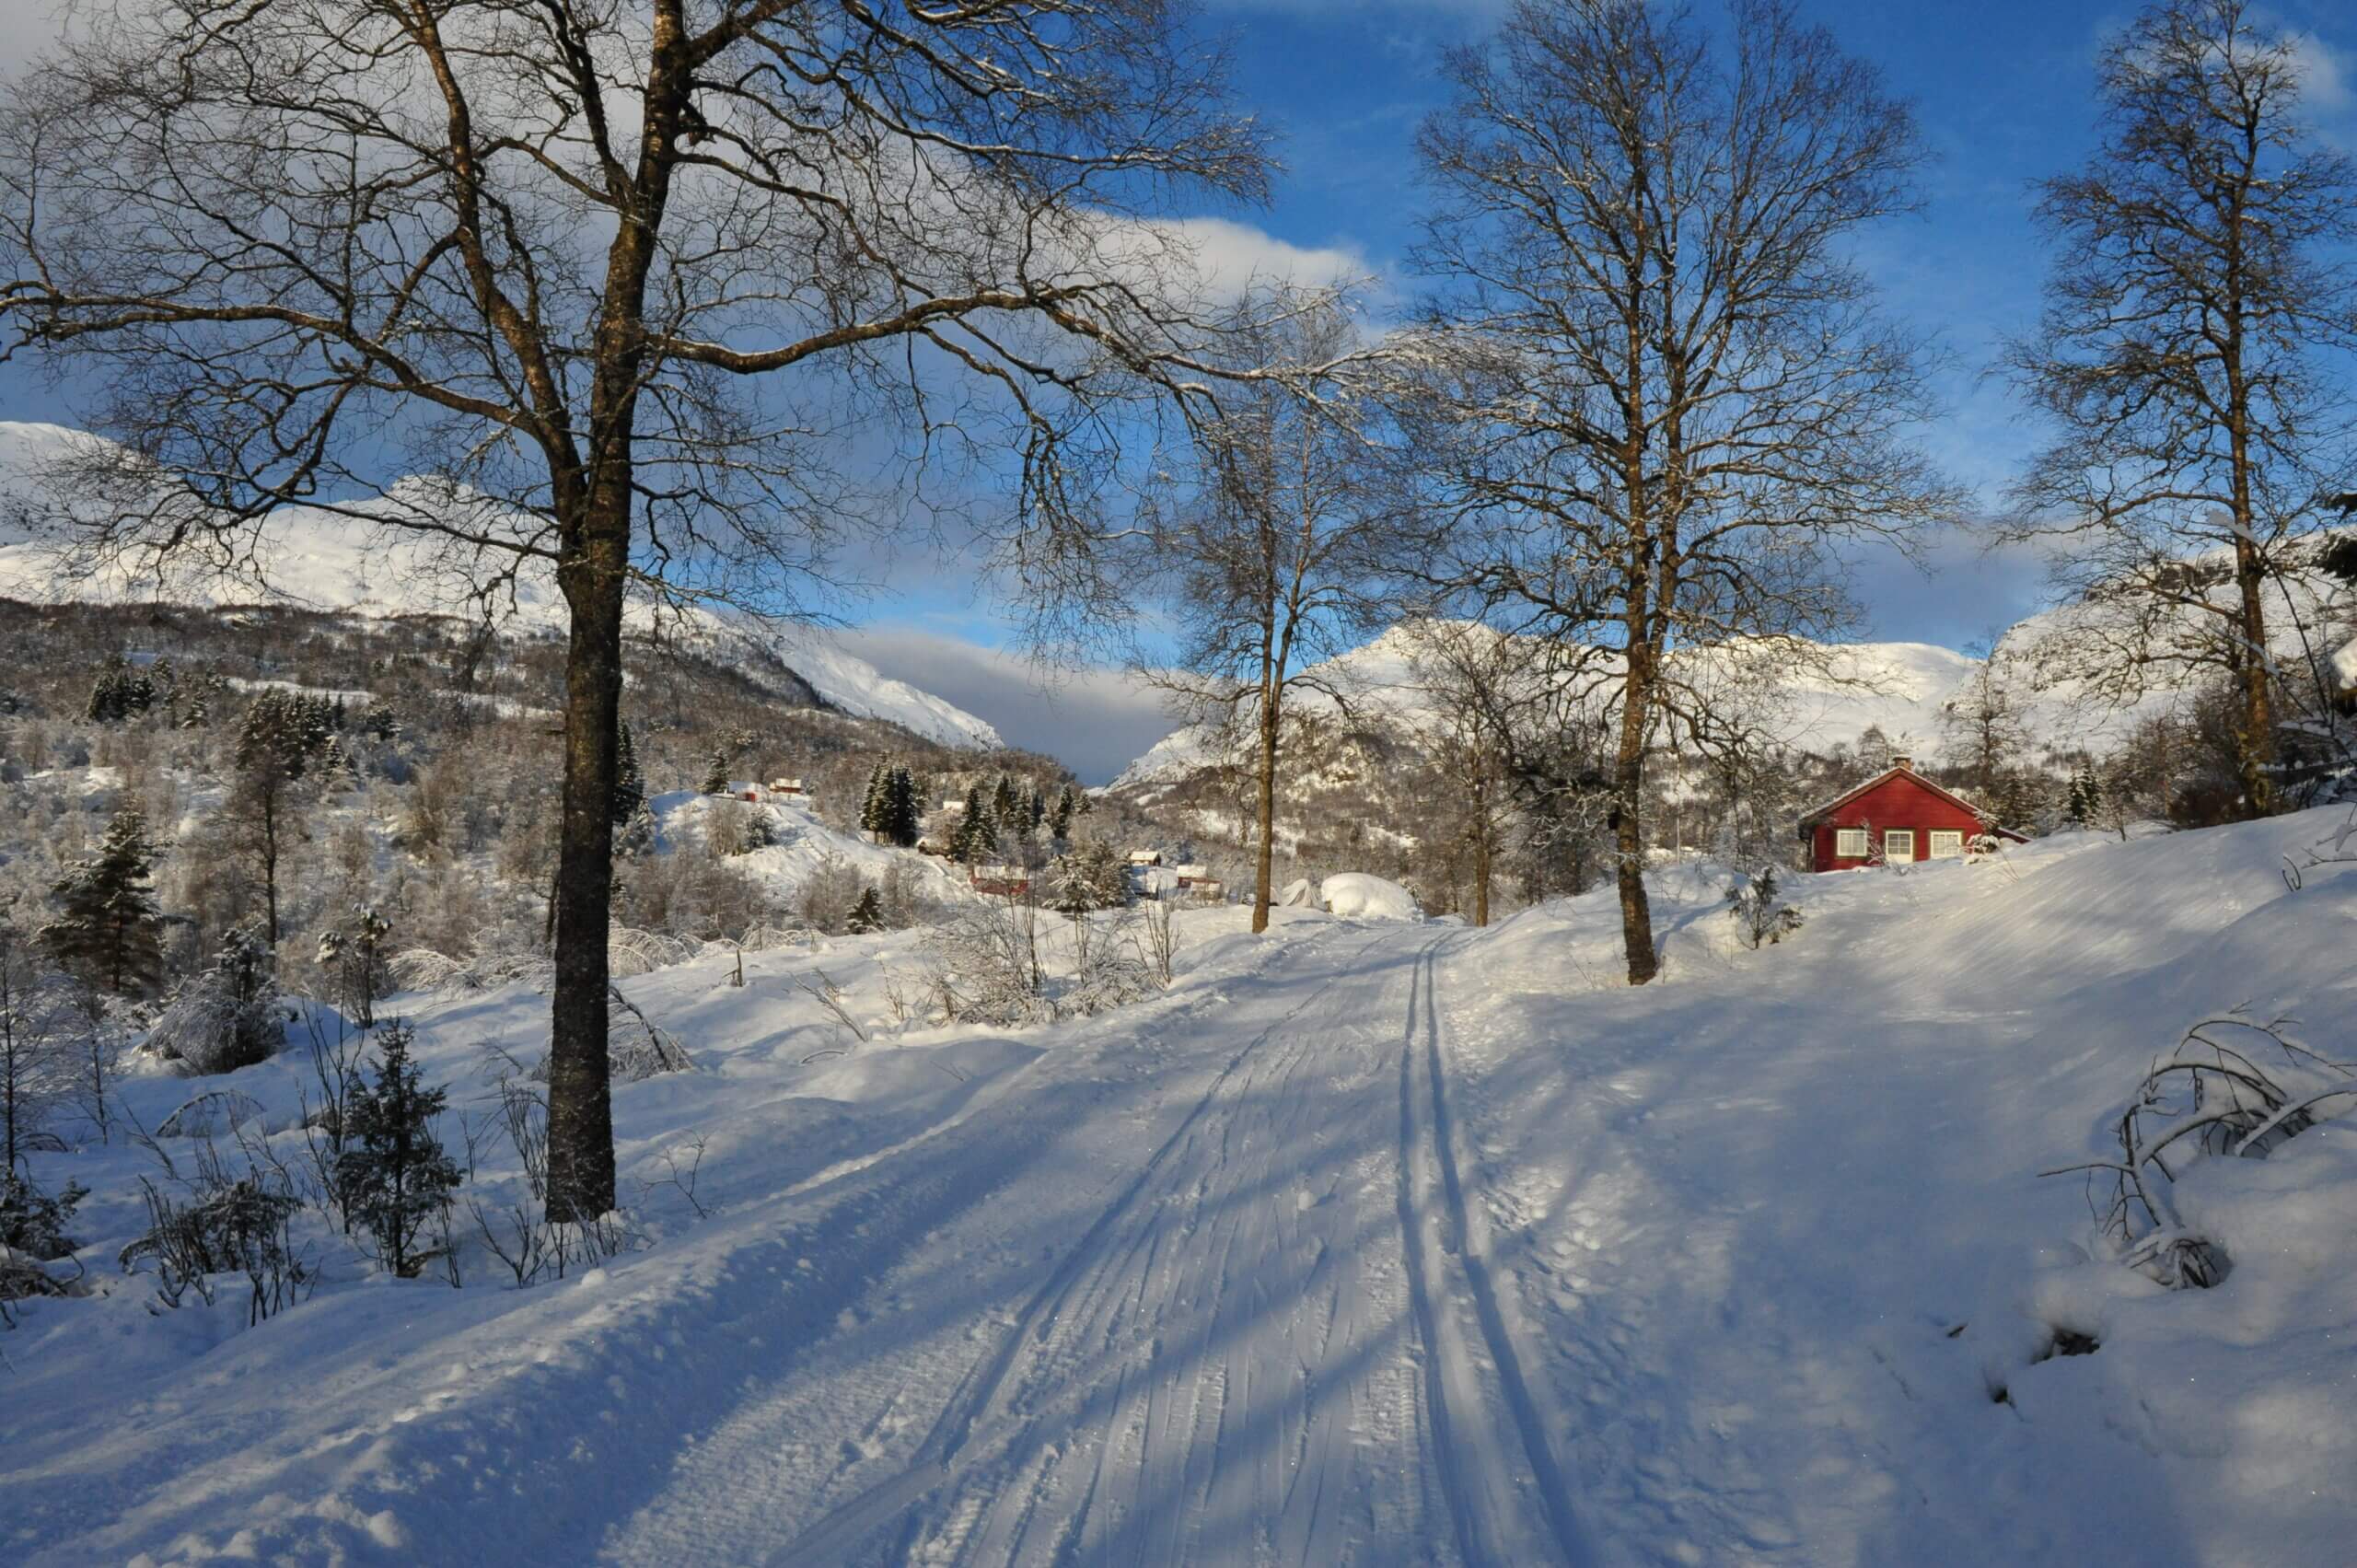 Nordstøldalen - a valley in Sauda in snow on a sunny day.